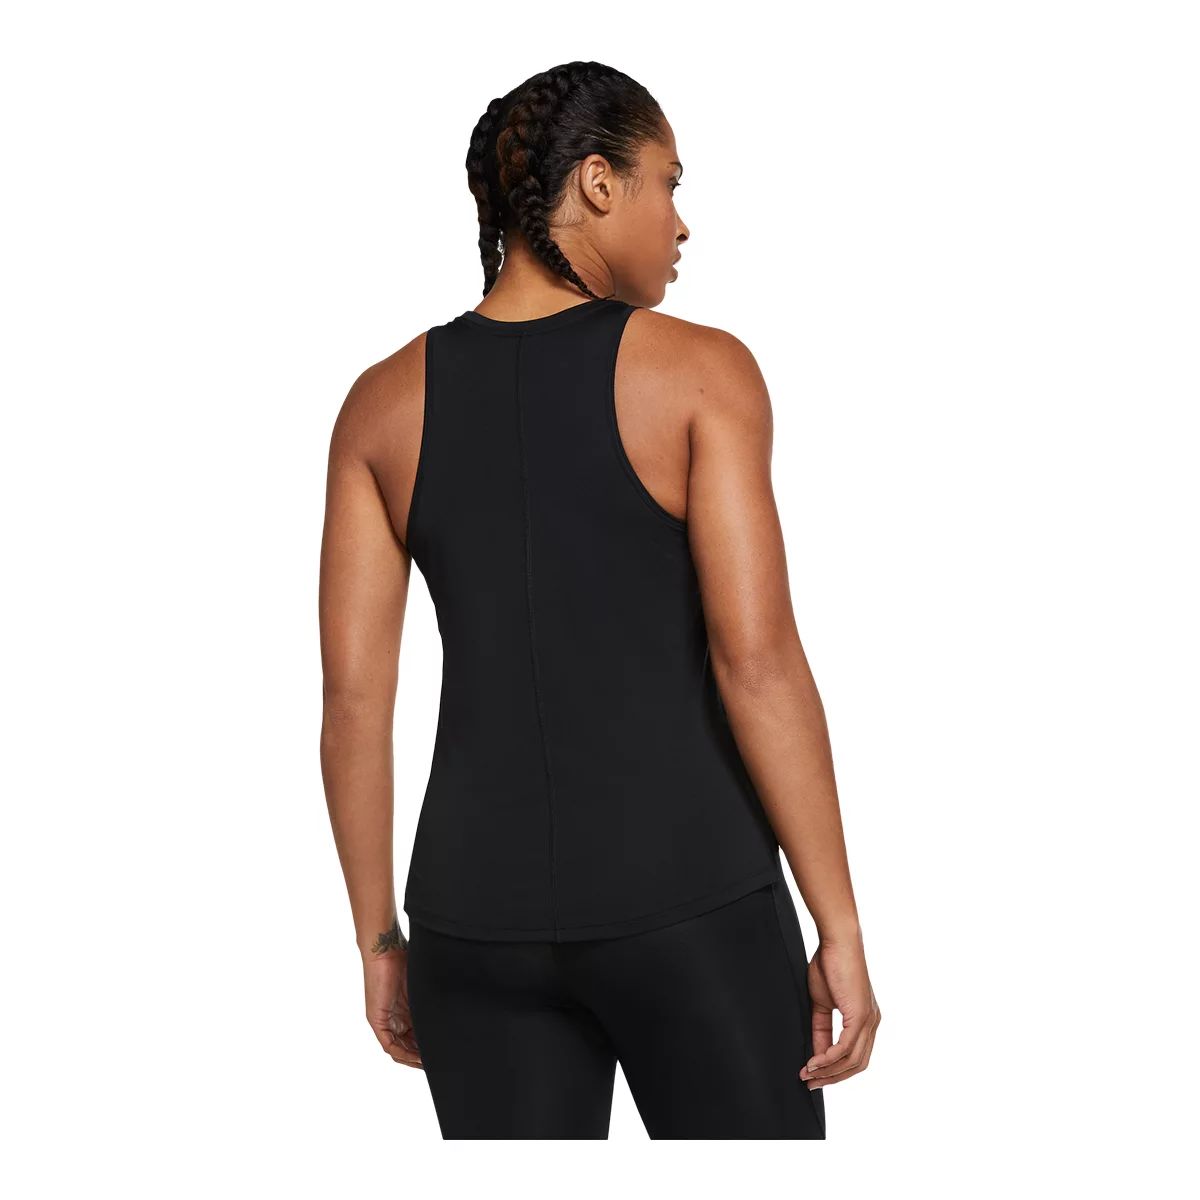 https://media-www.atmosphere.ca/product/div-03-softgoods/dpt-70-athletic-clothing/sdpt-02-womens/333473671/nike-w-one-std-tank-q321-bl-black-xs--cc248c50-0292-4065-b7f2-cc2a8fc12f76-jpgrendition.jpg?imdensity=1&imwidth=1244&impolicy=mZoom